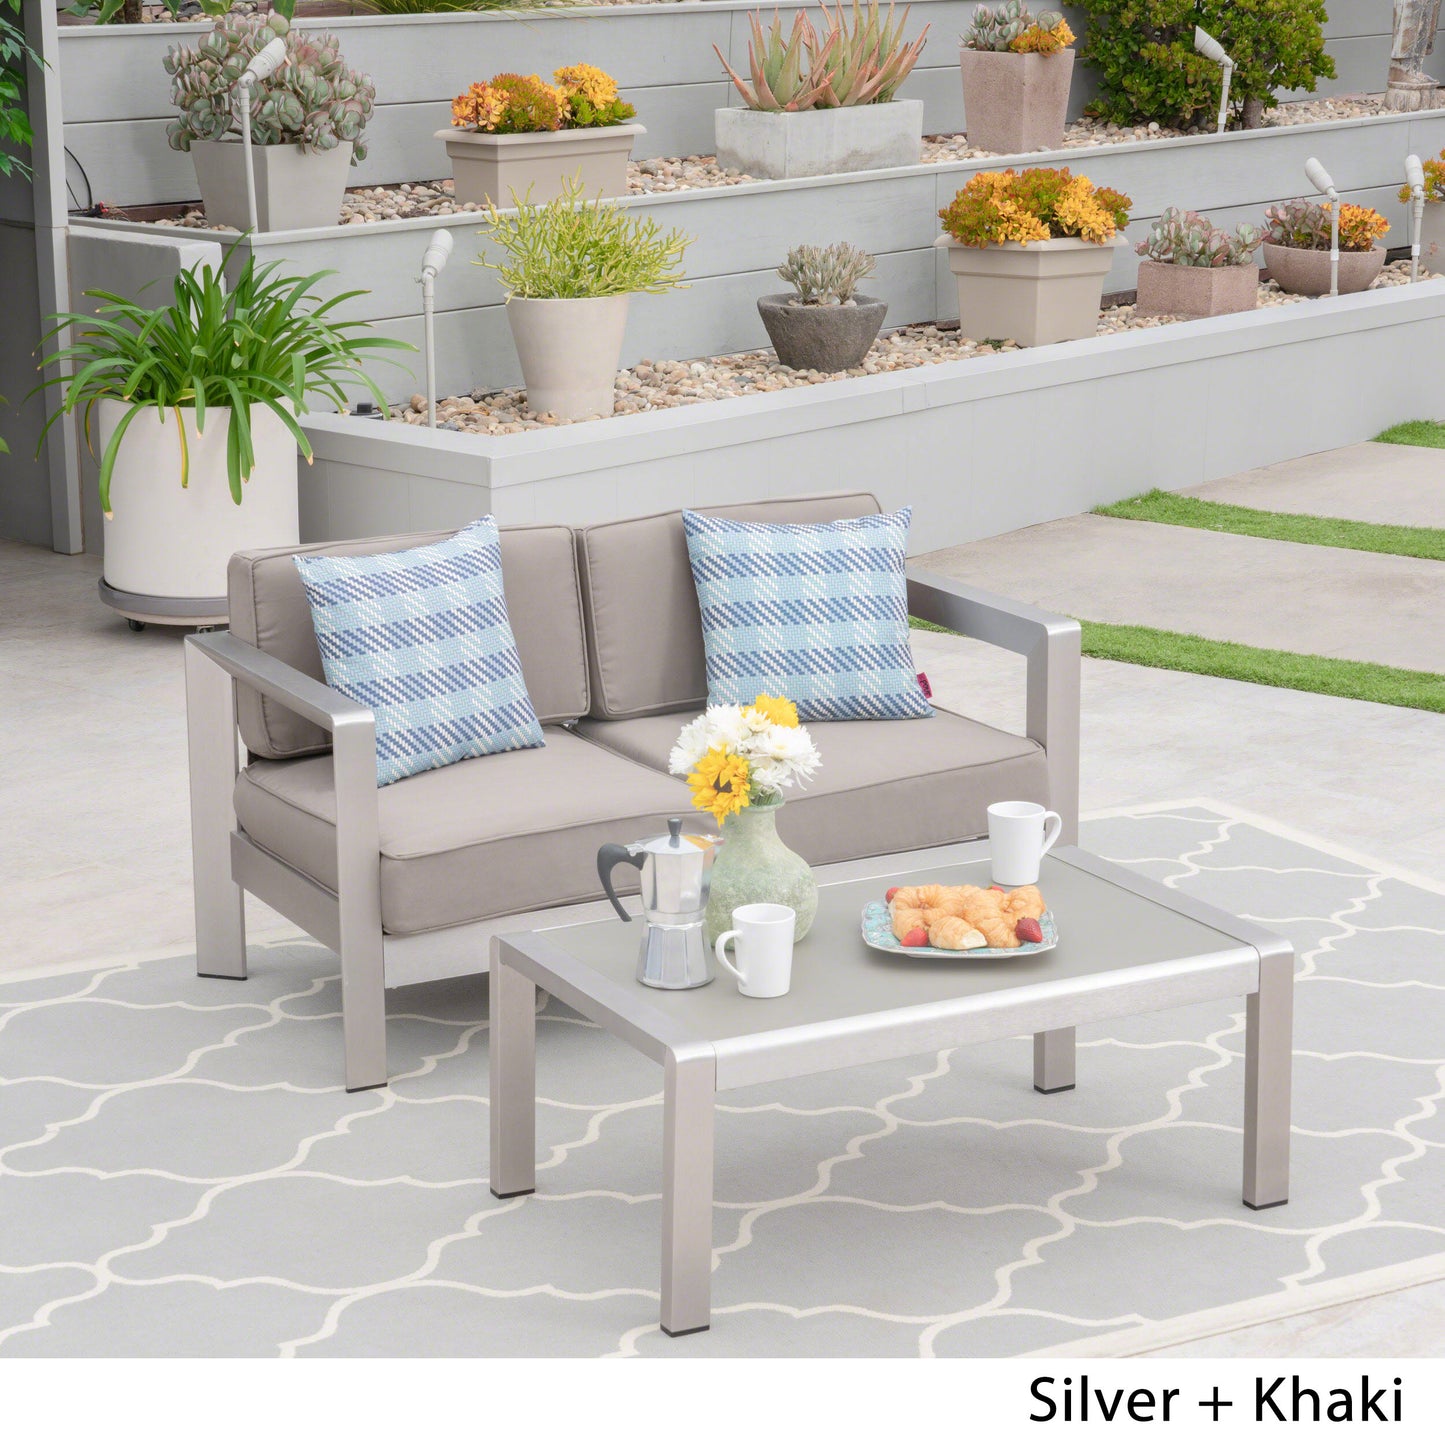 Booth Outdoor Aluminum Loveseat and Tempered Glass-Topped Coffee Table